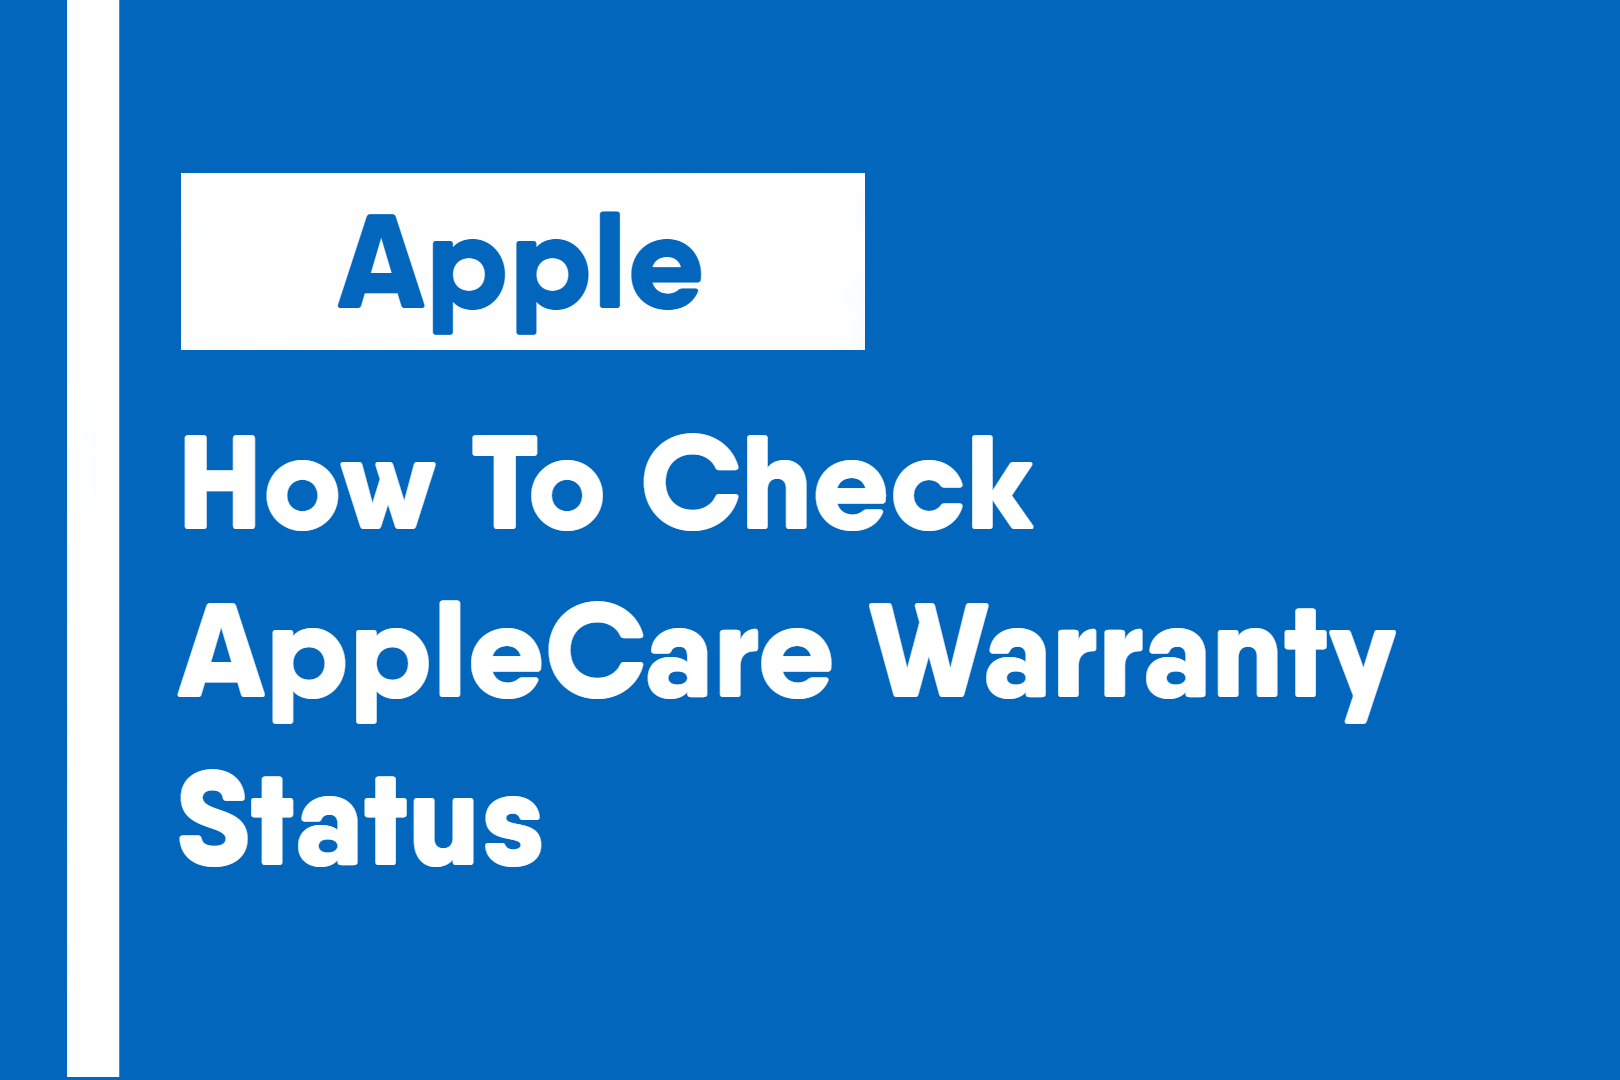 How To Check AppleCare Warranty Status